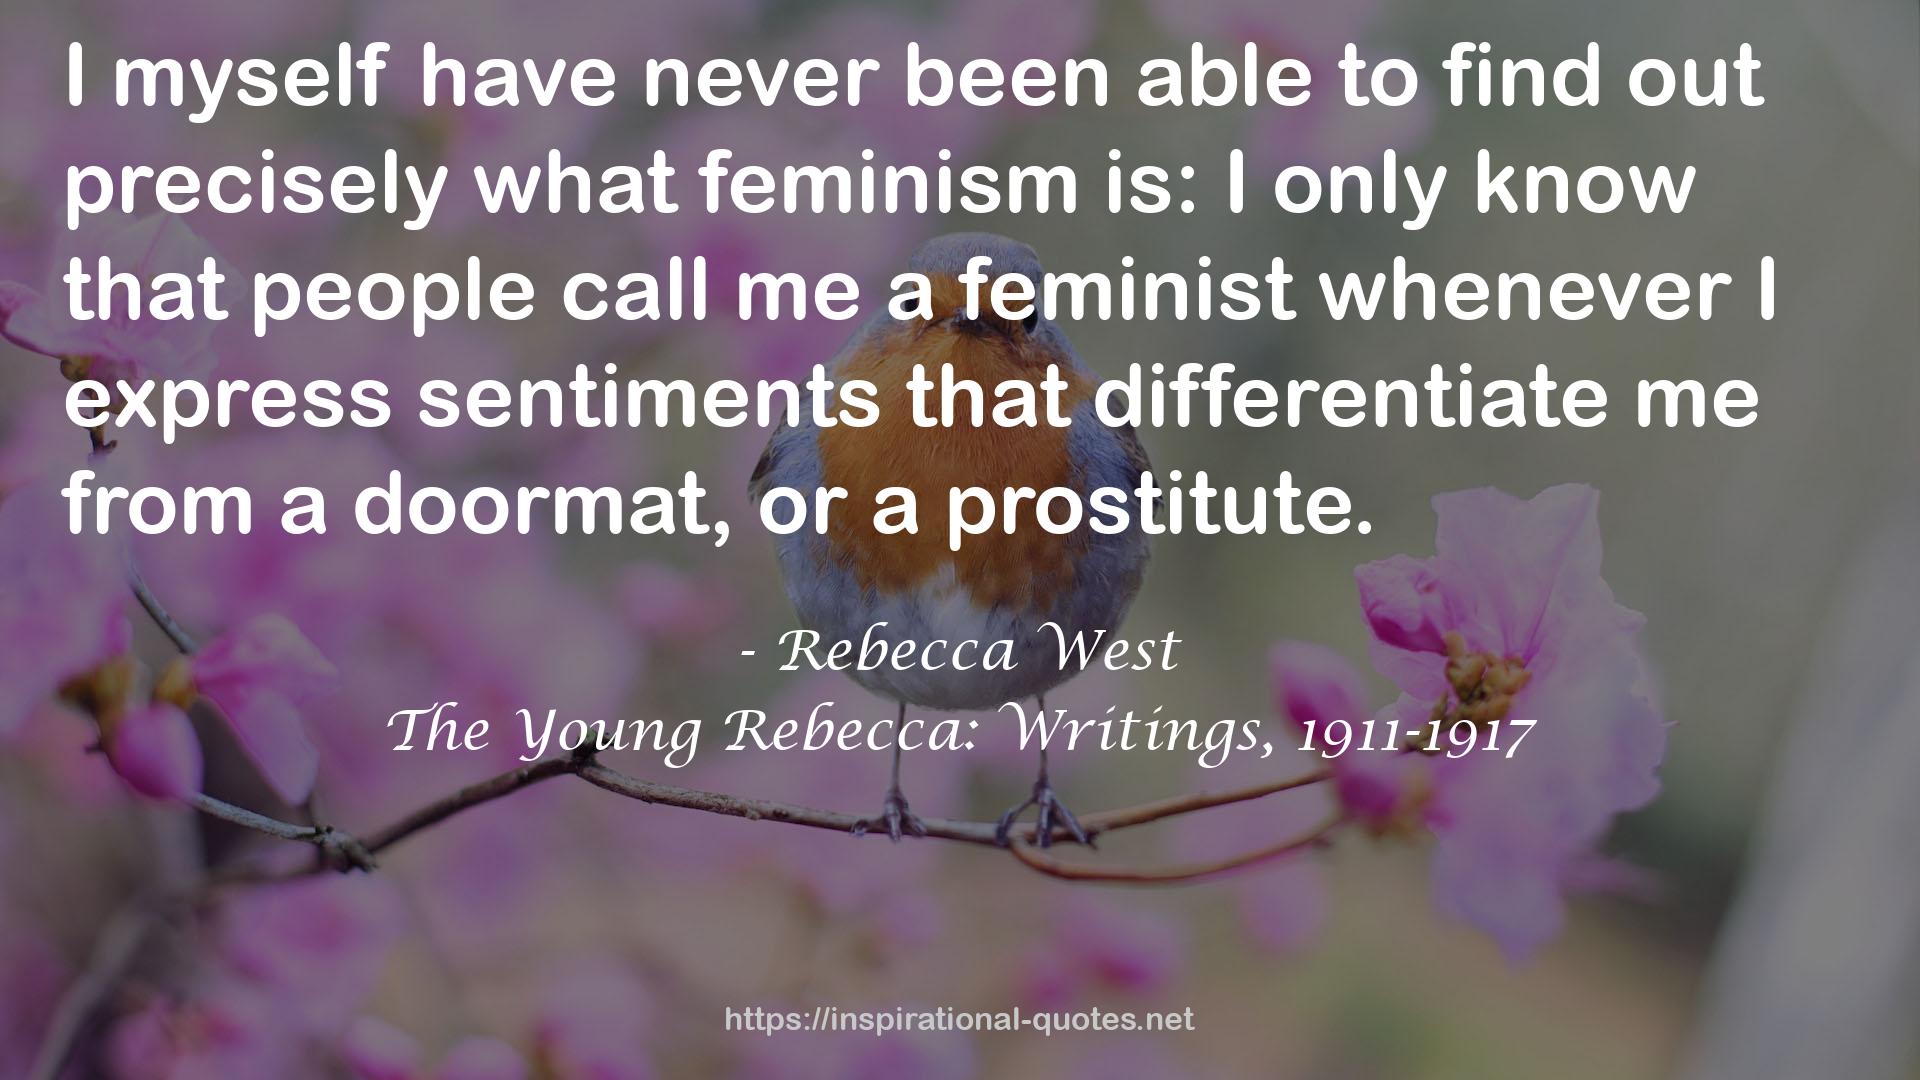 The Young Rebecca: Writings, 1911-1917 QUOTES